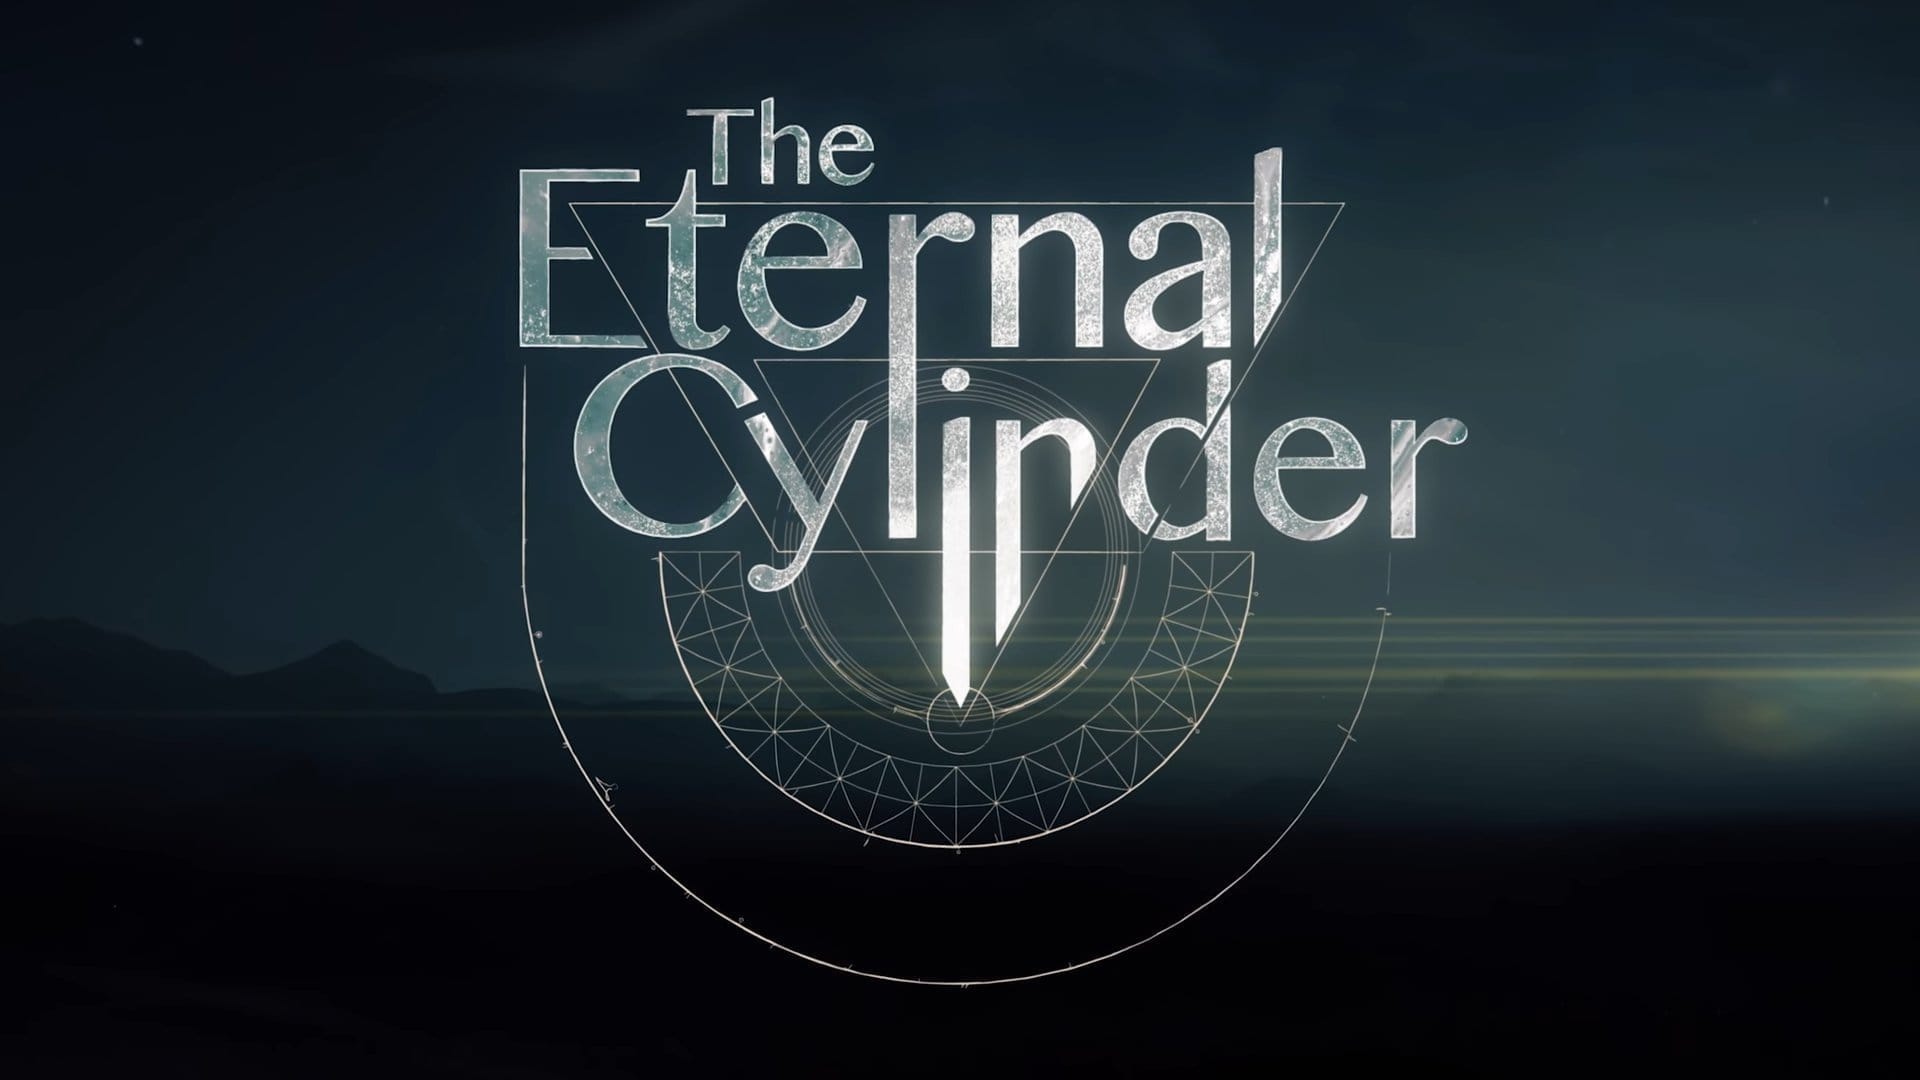 The Eternal Cylinder New Wallpapers